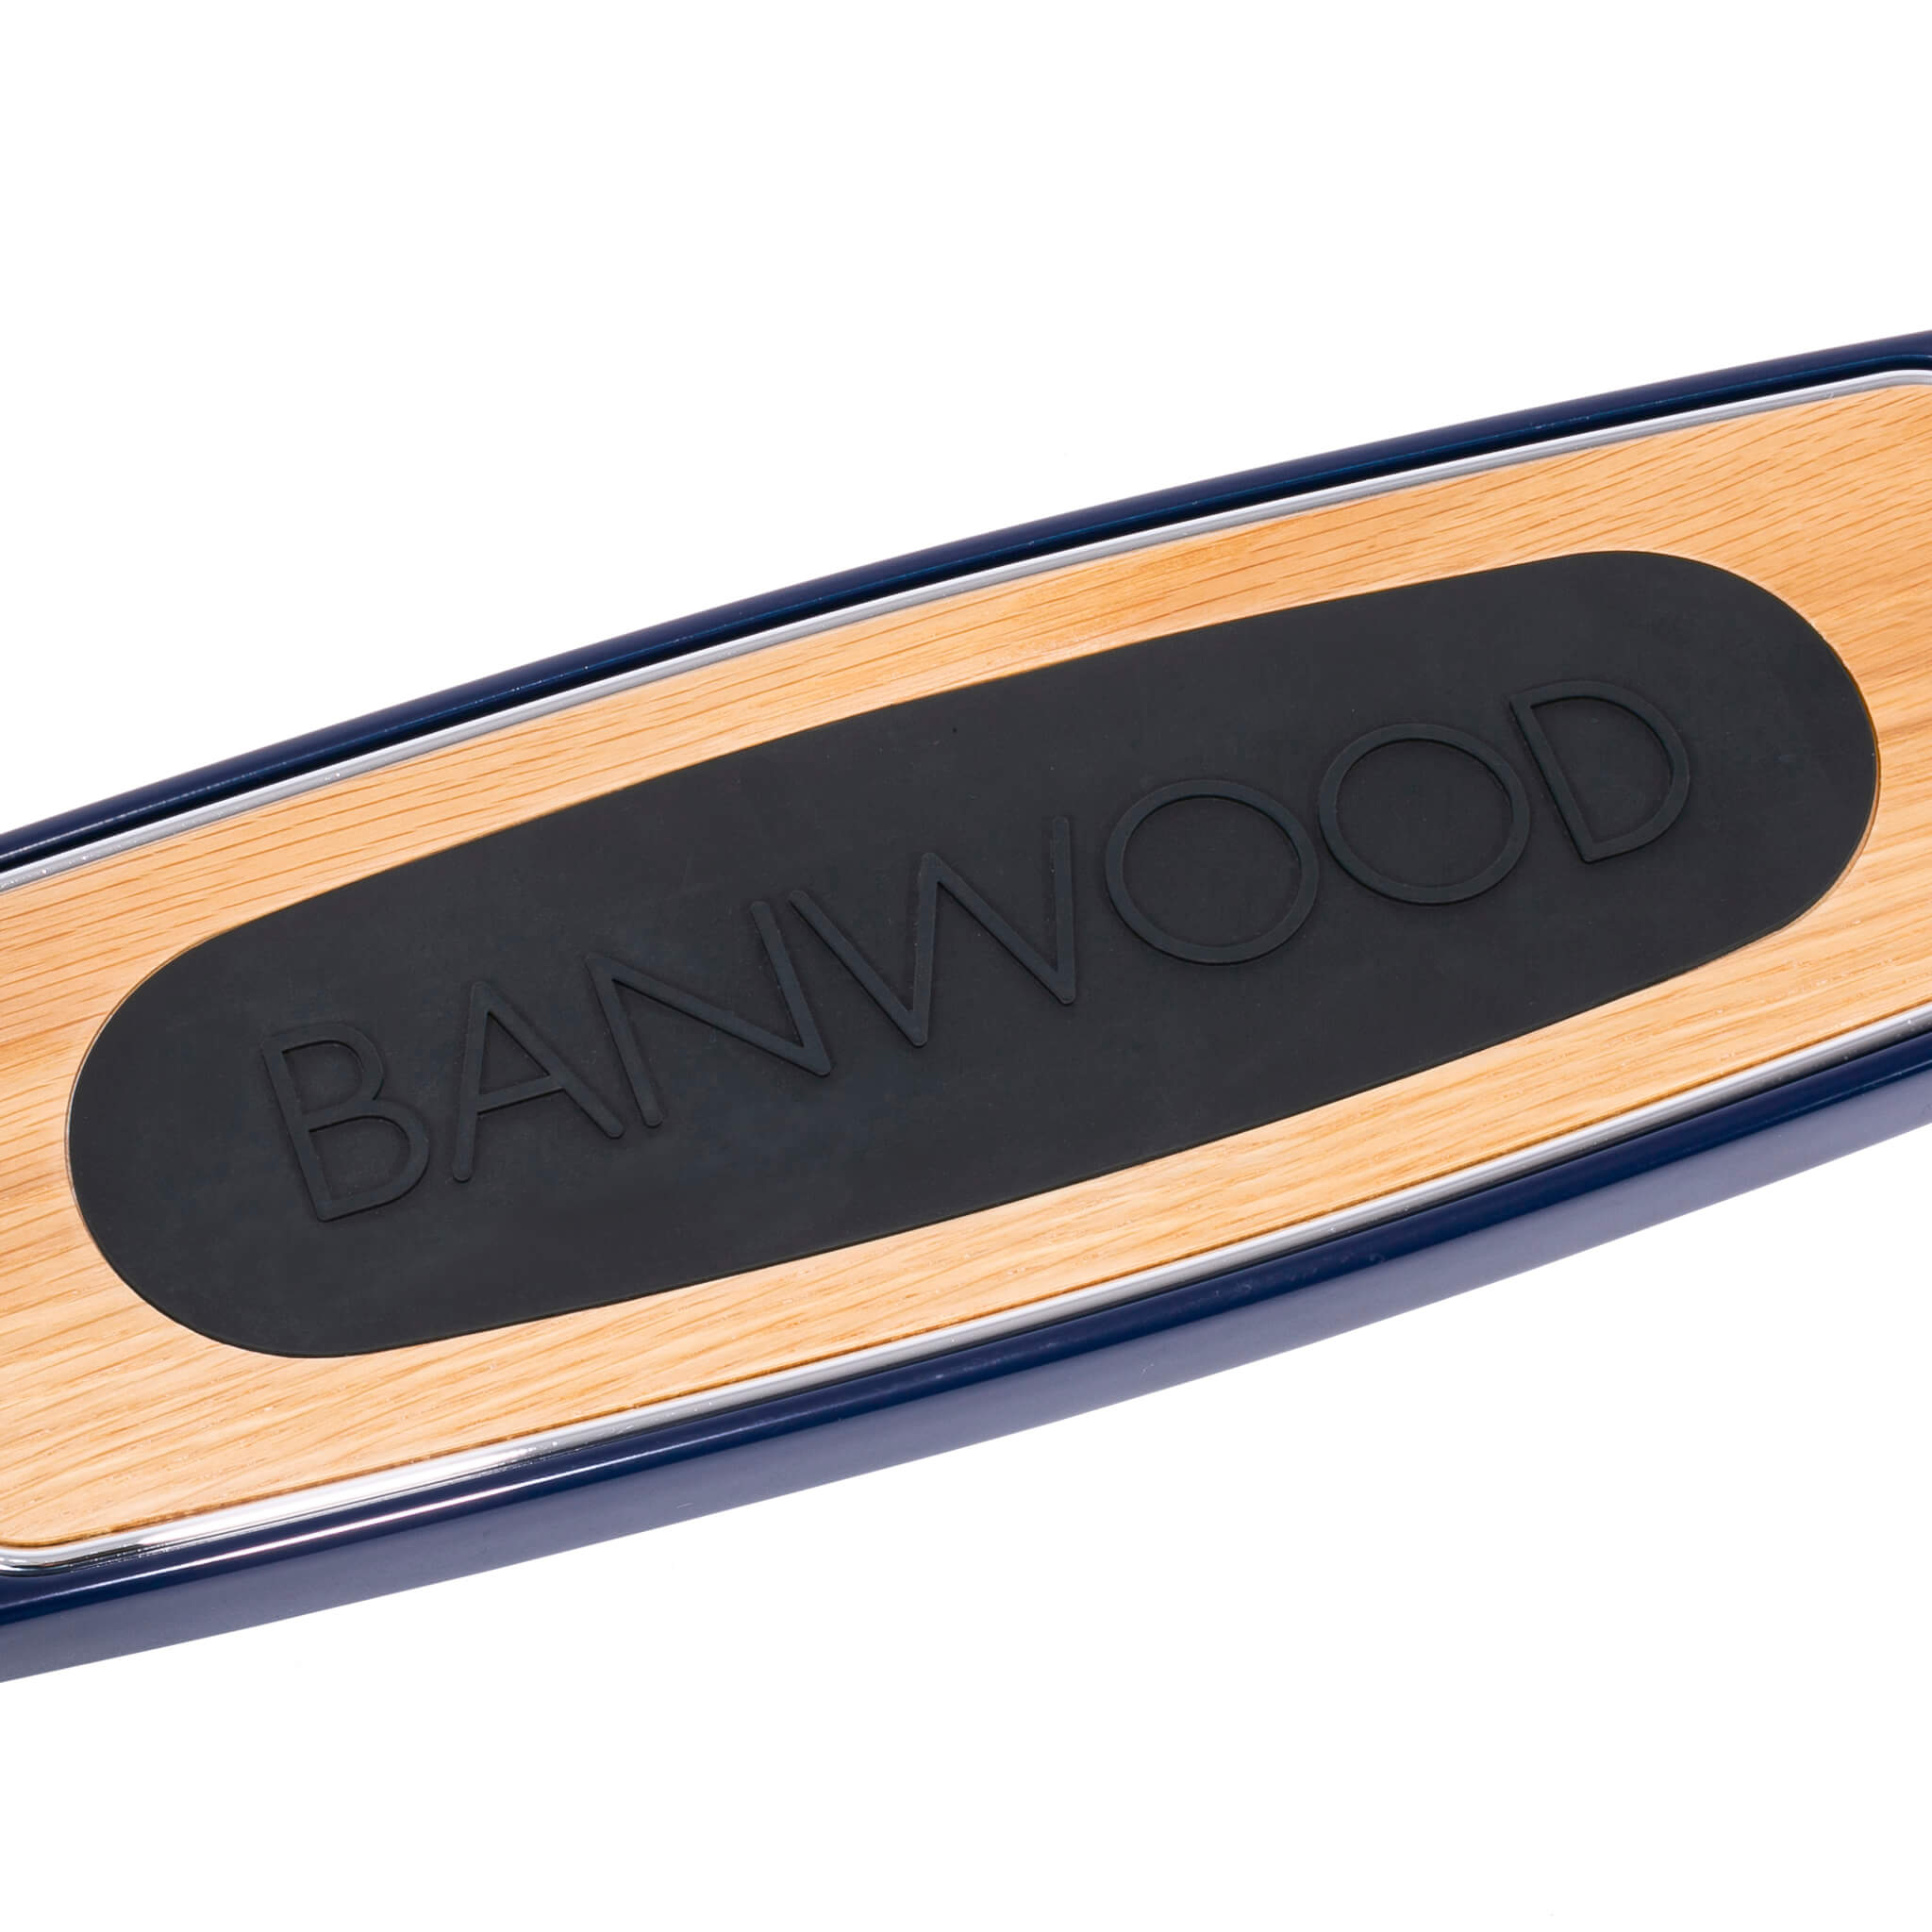 Banwood Kids Scooter in Navy 